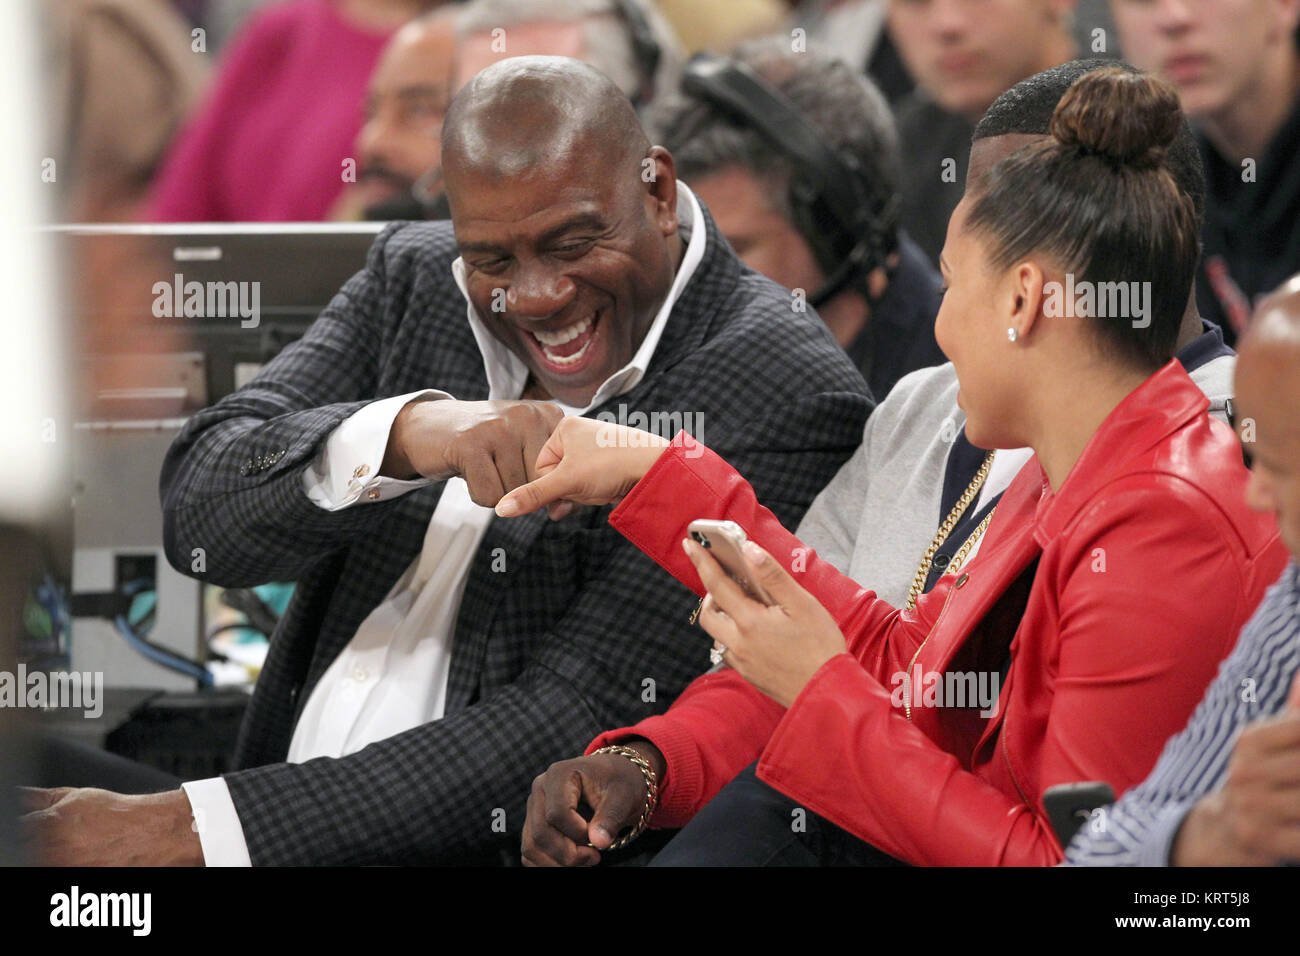 NEW YORK, NY - NOVEMBER 08: (Embargoed till November 10, 2015) Magic Johnson, Tracy Morgan with wife Megan Wollover sit with Michael K. Williams and  Director Spike Lee at the New York Knicks vs Los Angeles Lakers game at Madison Square Garden on November 8, 2015 in New York City.   People:  Magic Johnson, Tracy Morgan, Megan Wollover Stock Photo